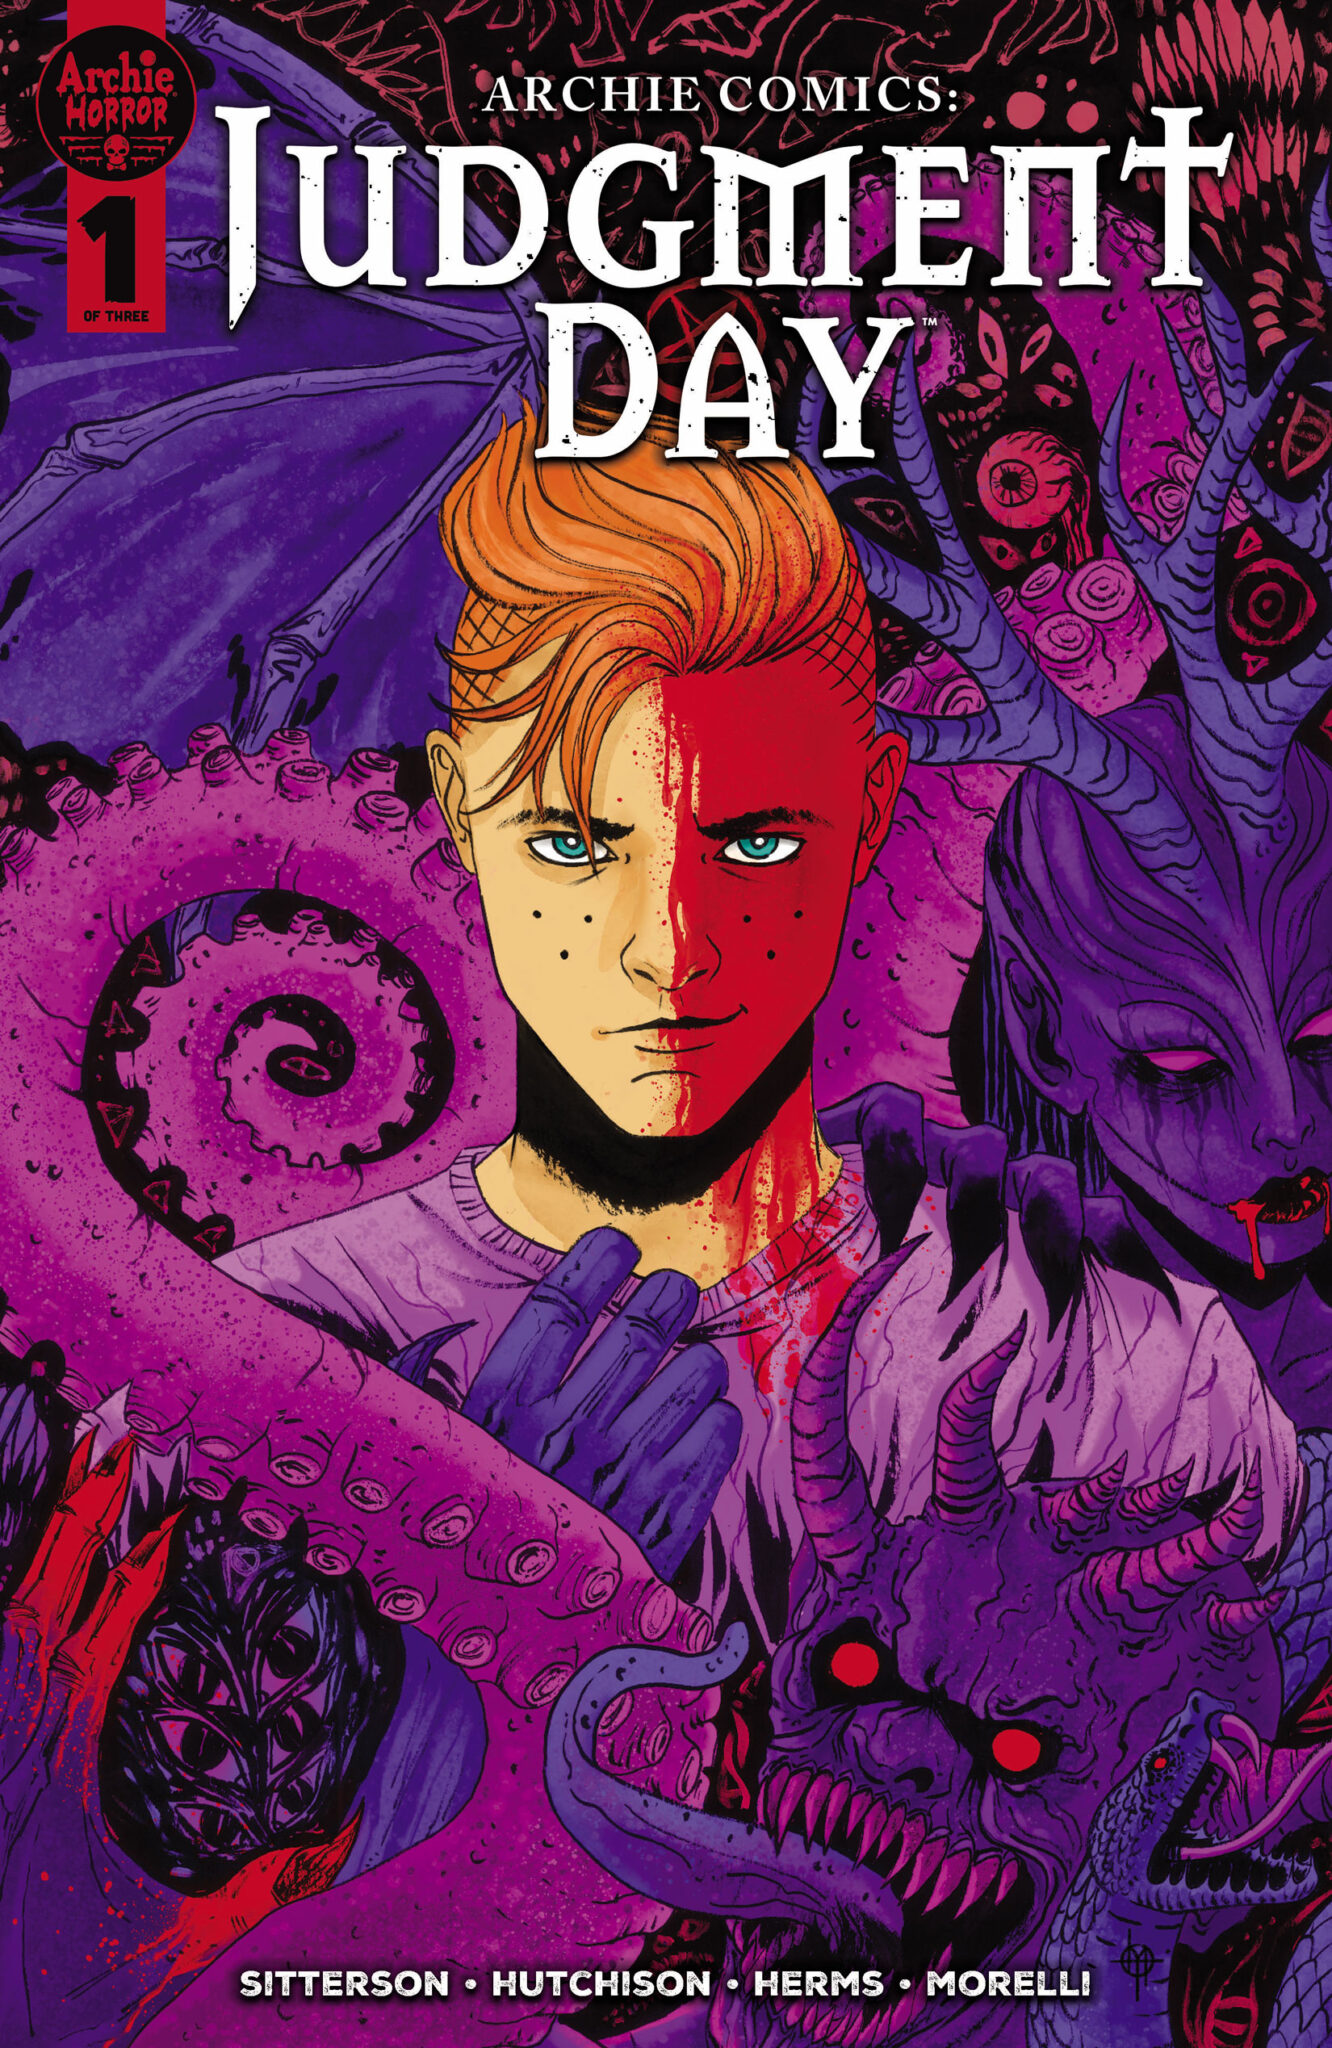 ARCHIE COMICS: JUDGMENT DAY #1 cover